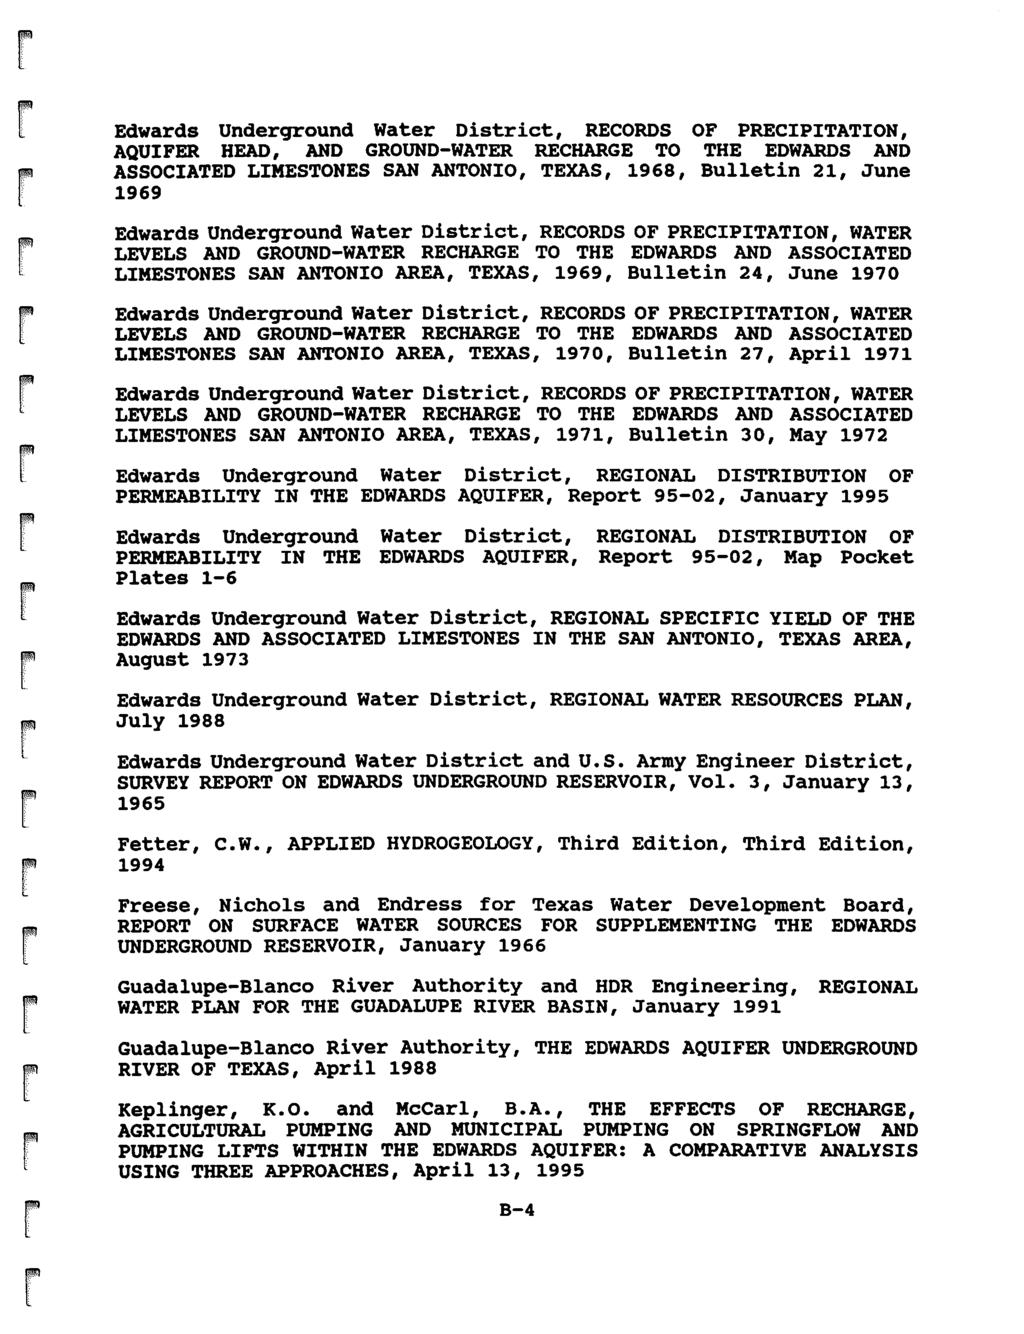 Edwads Undegound Wate Distict, RECORDS OF PRECPTATON, AQUFER HEAD, AND GROUND-WATER RECHARGE TO THE EDWARDS AND ASSOCATED LMESTONES SAN ANTONO, TEXAS, 1968, Bulletin 21, June 1969 Edwads Undegound